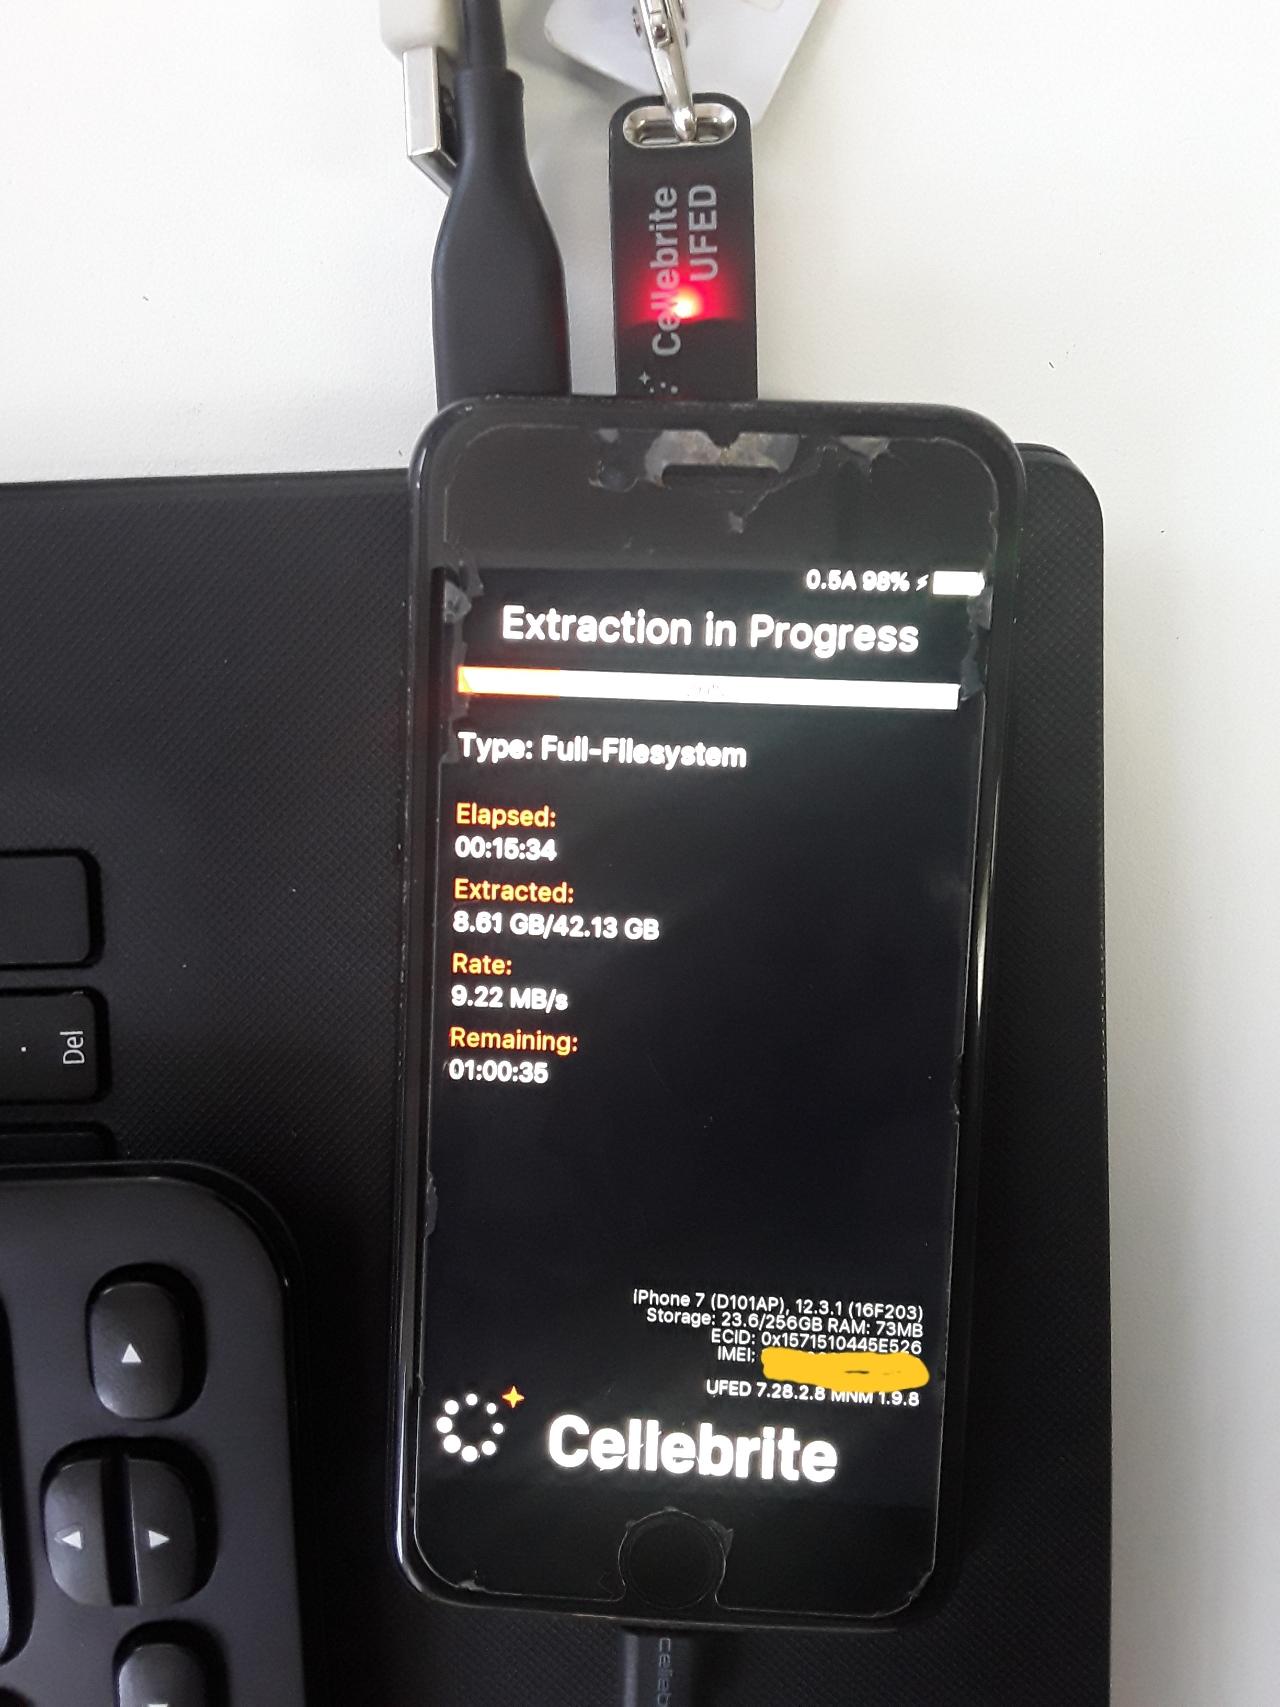 Hacking an iPhone with Cellebrite